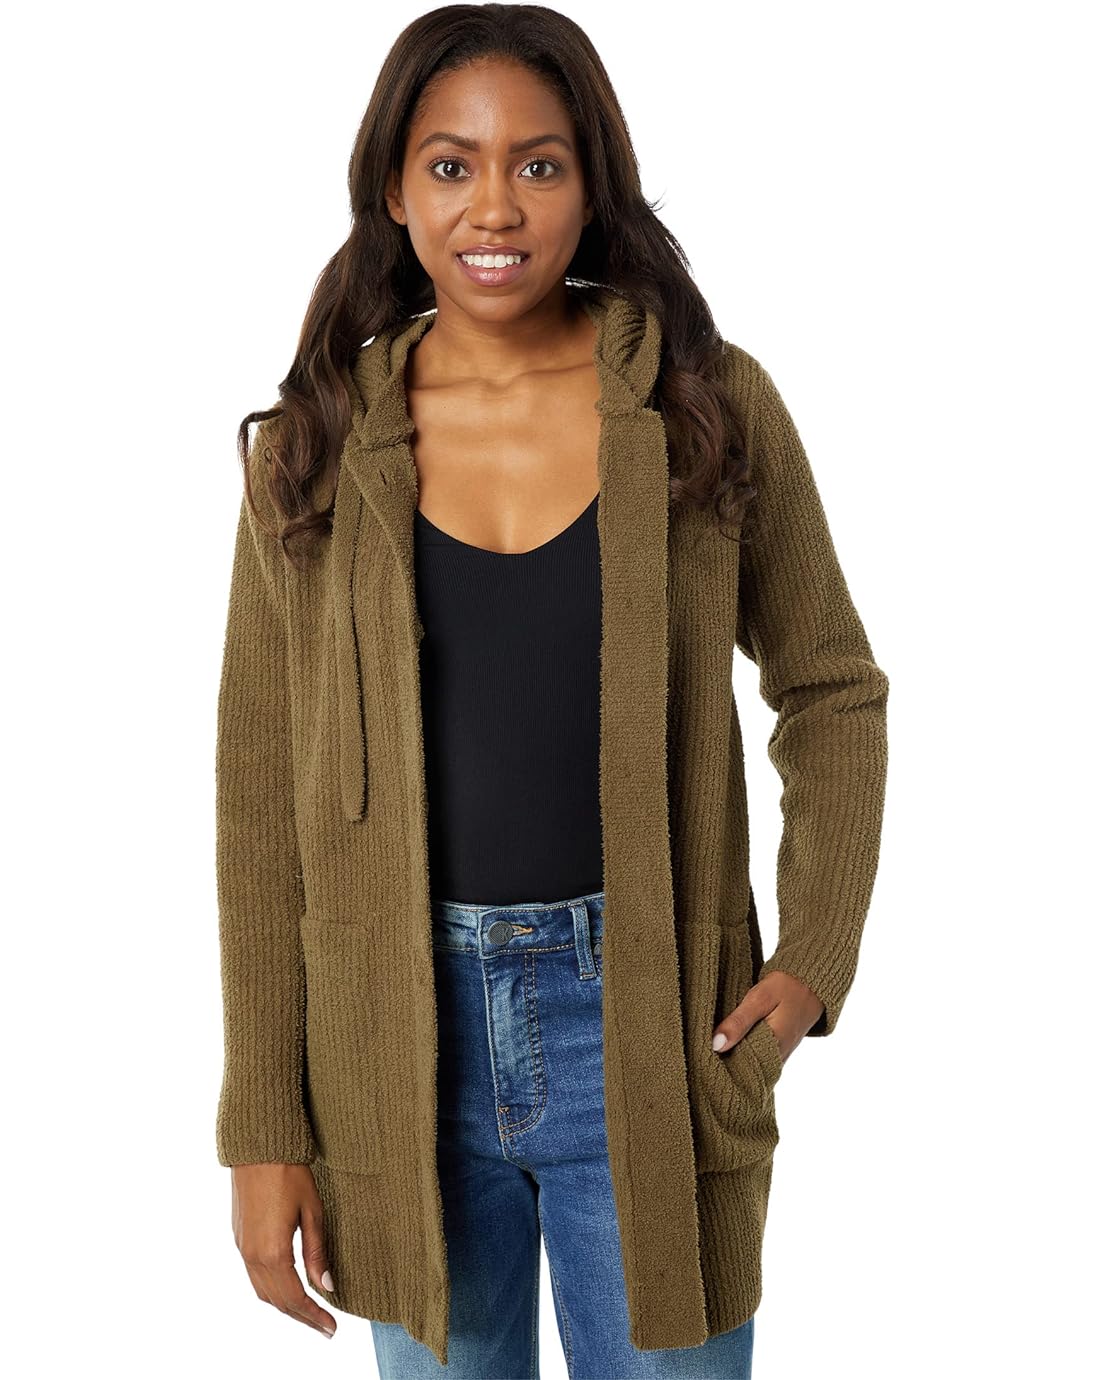 Barefoot Dreams CozyChic Button-Up Hooded Sweater